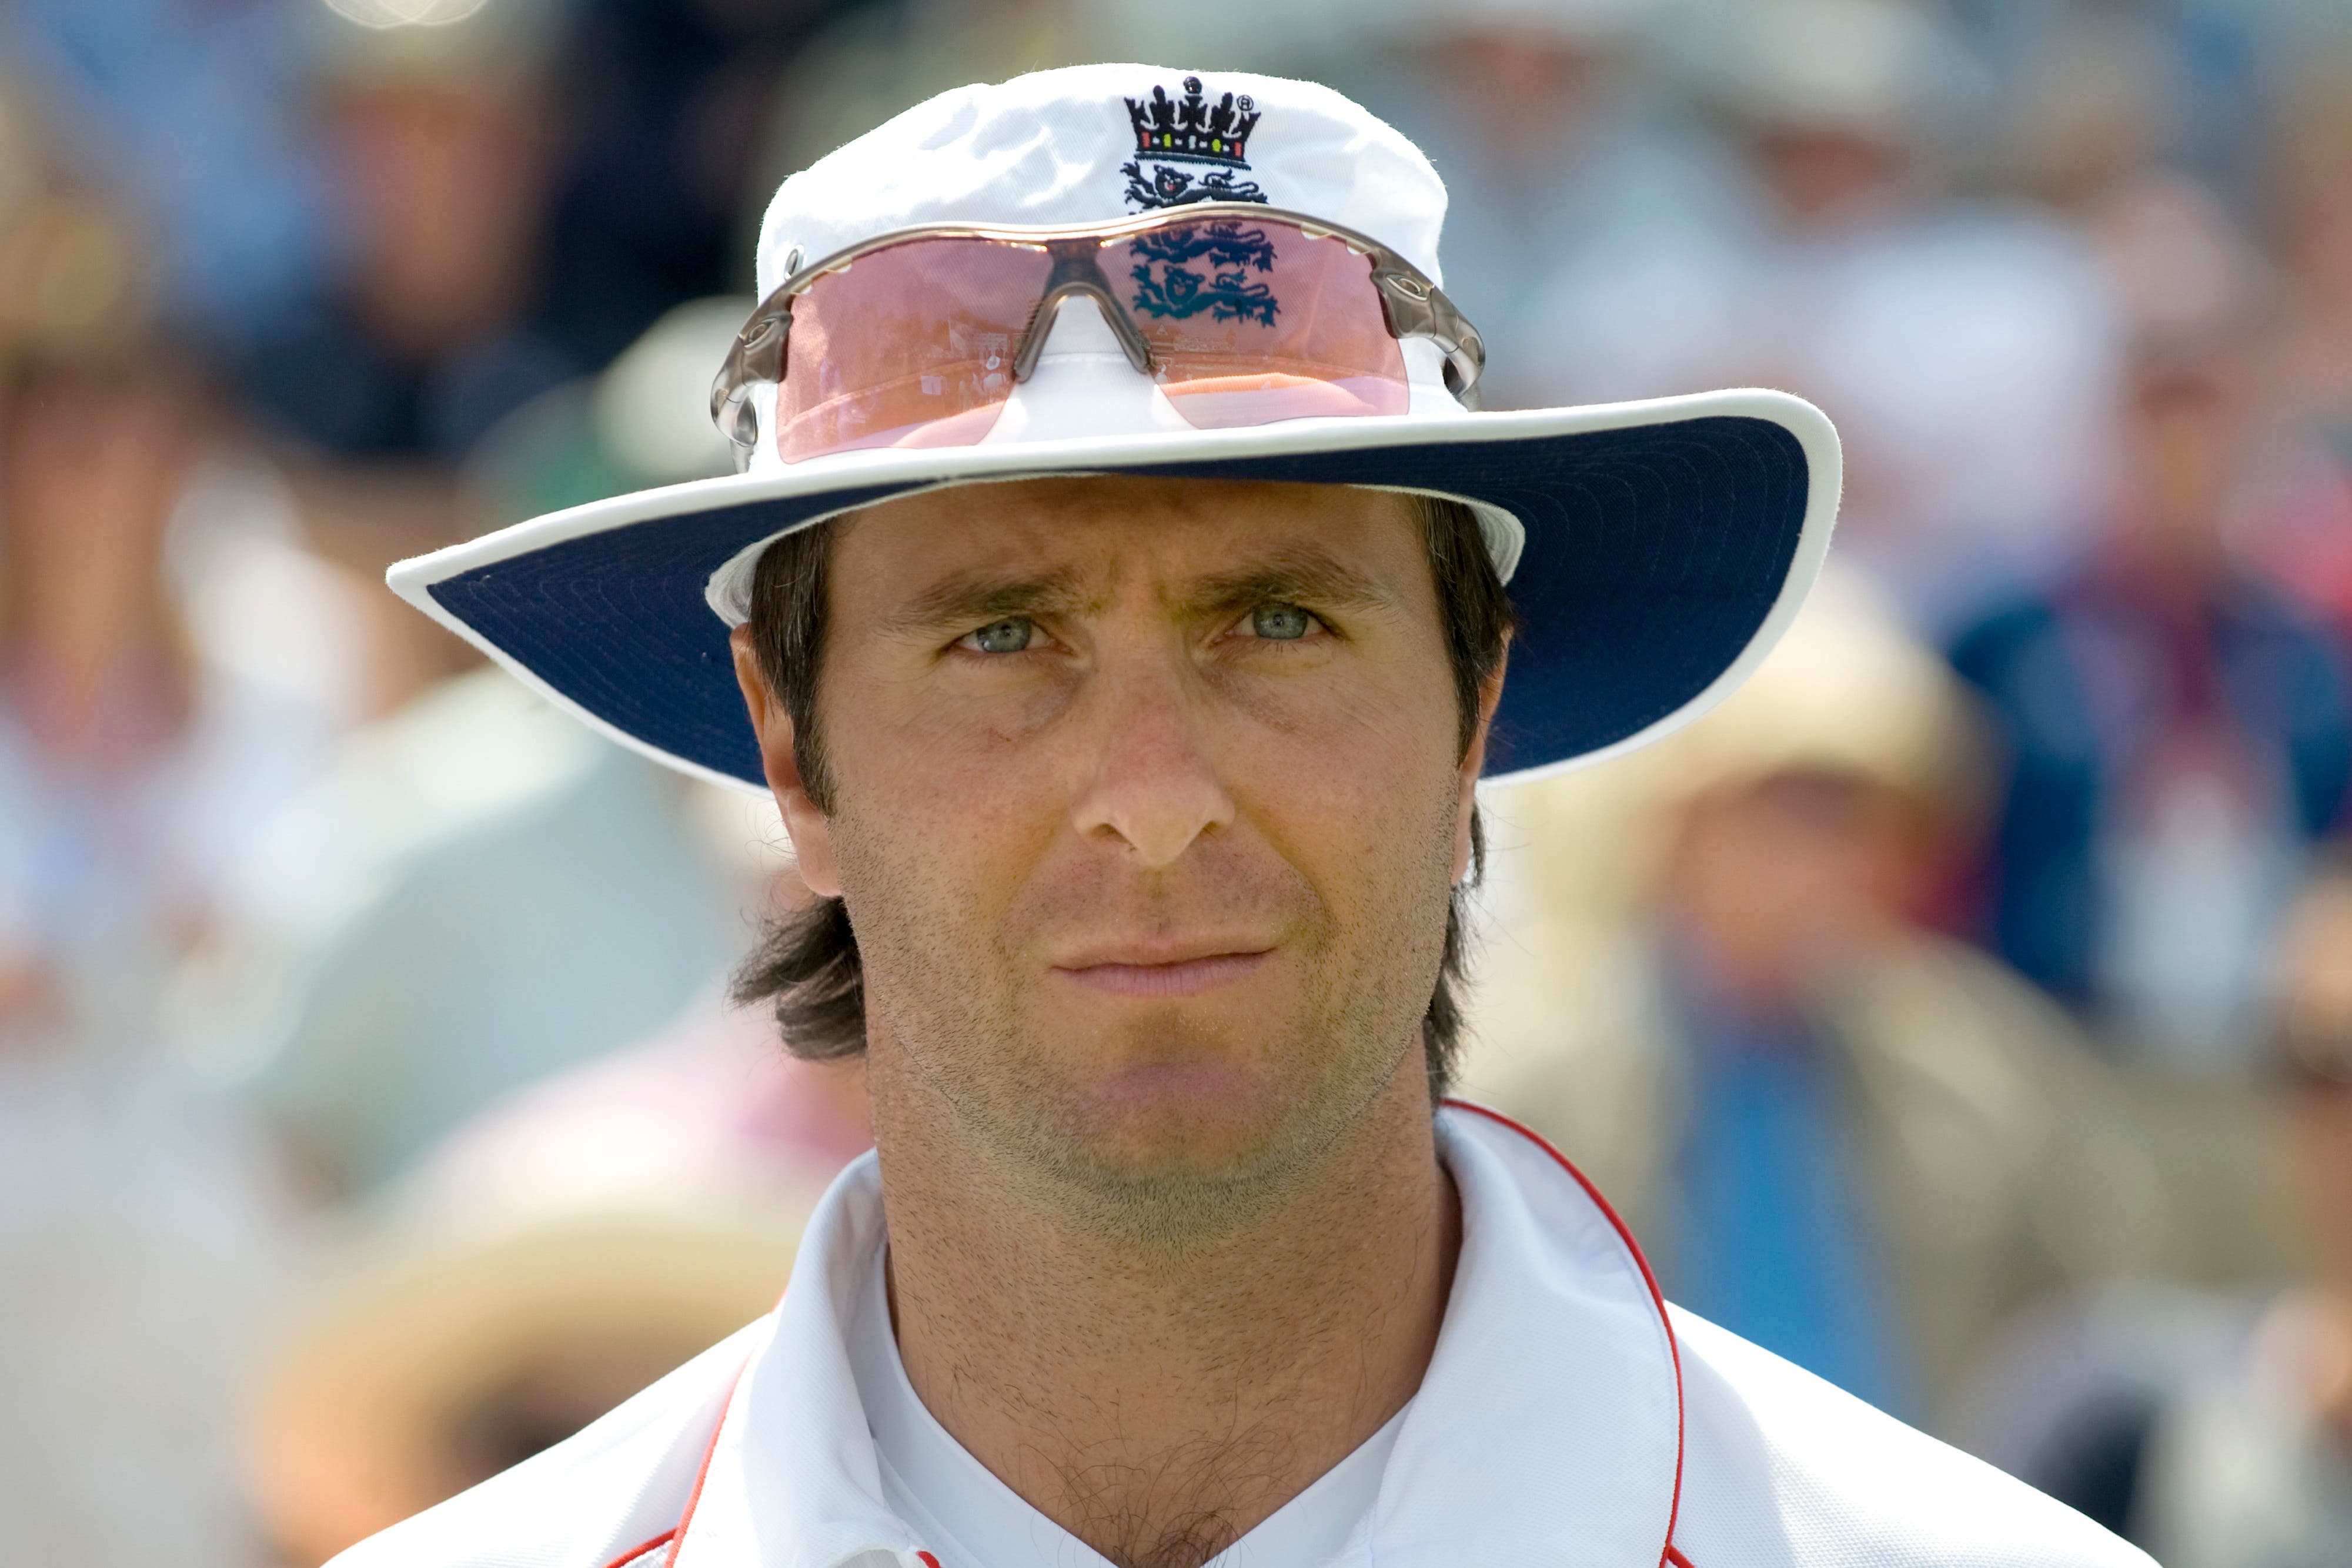 England captain Michael Vaughan was forced to miss the 2006-07 Ashes tour through injury (Gareth Copley/PA)